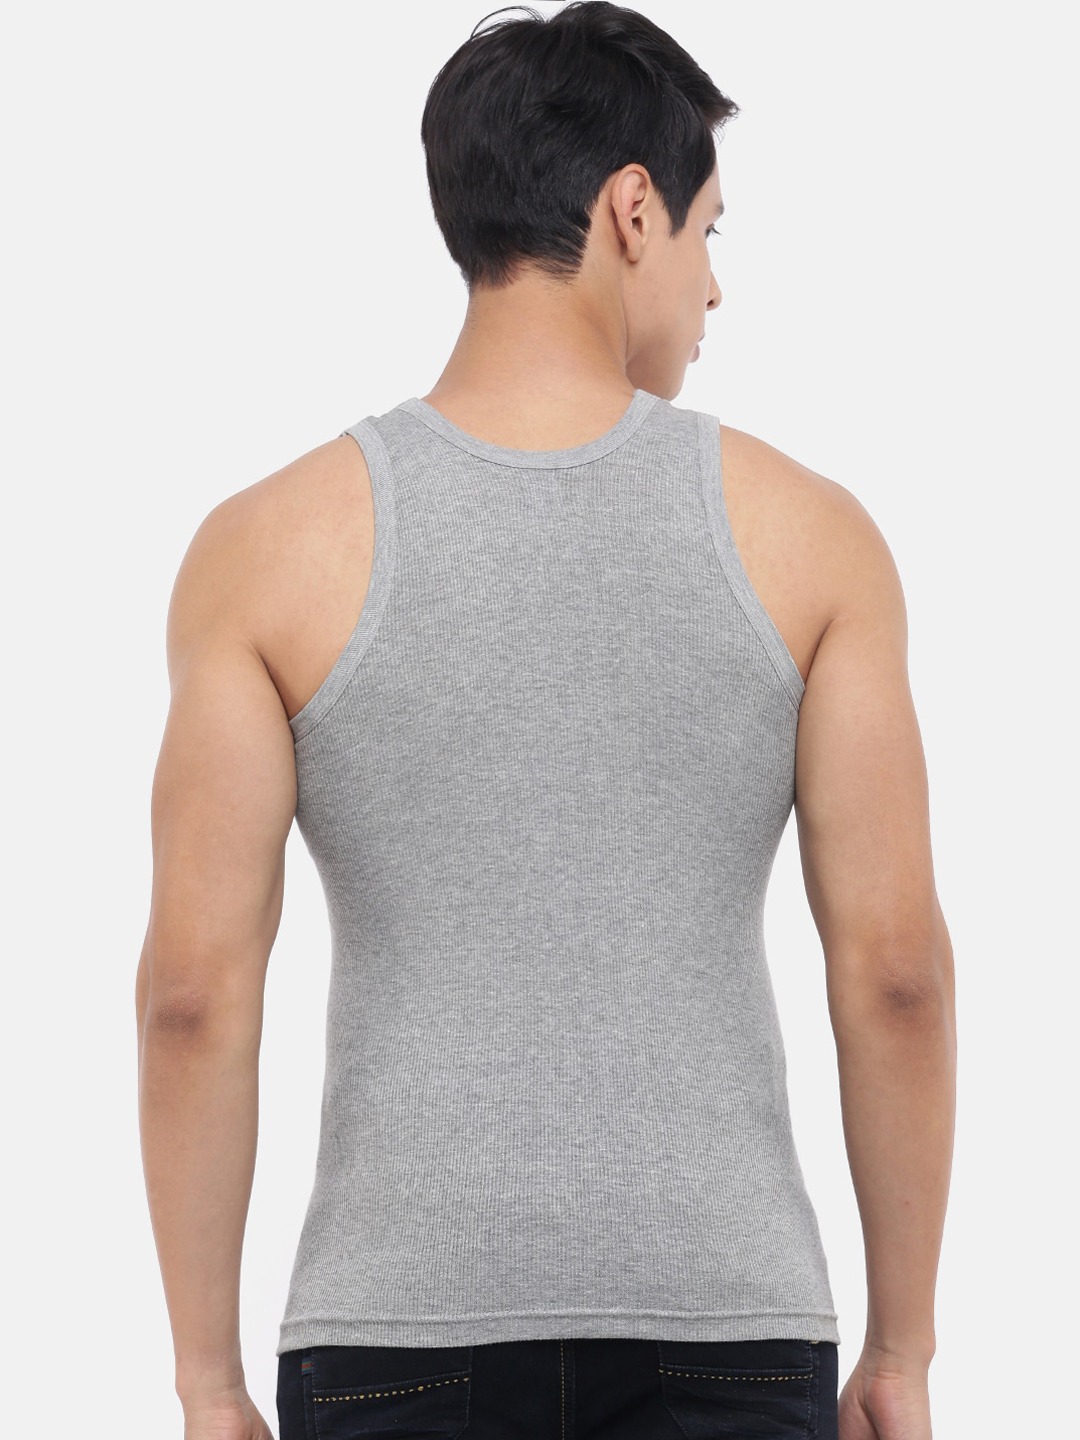 Clothing Innerwear Vests | Dollar Bigboss Men Pack Of 10 Solid Pure Combed Cotton Innerwear Vests - DY99928